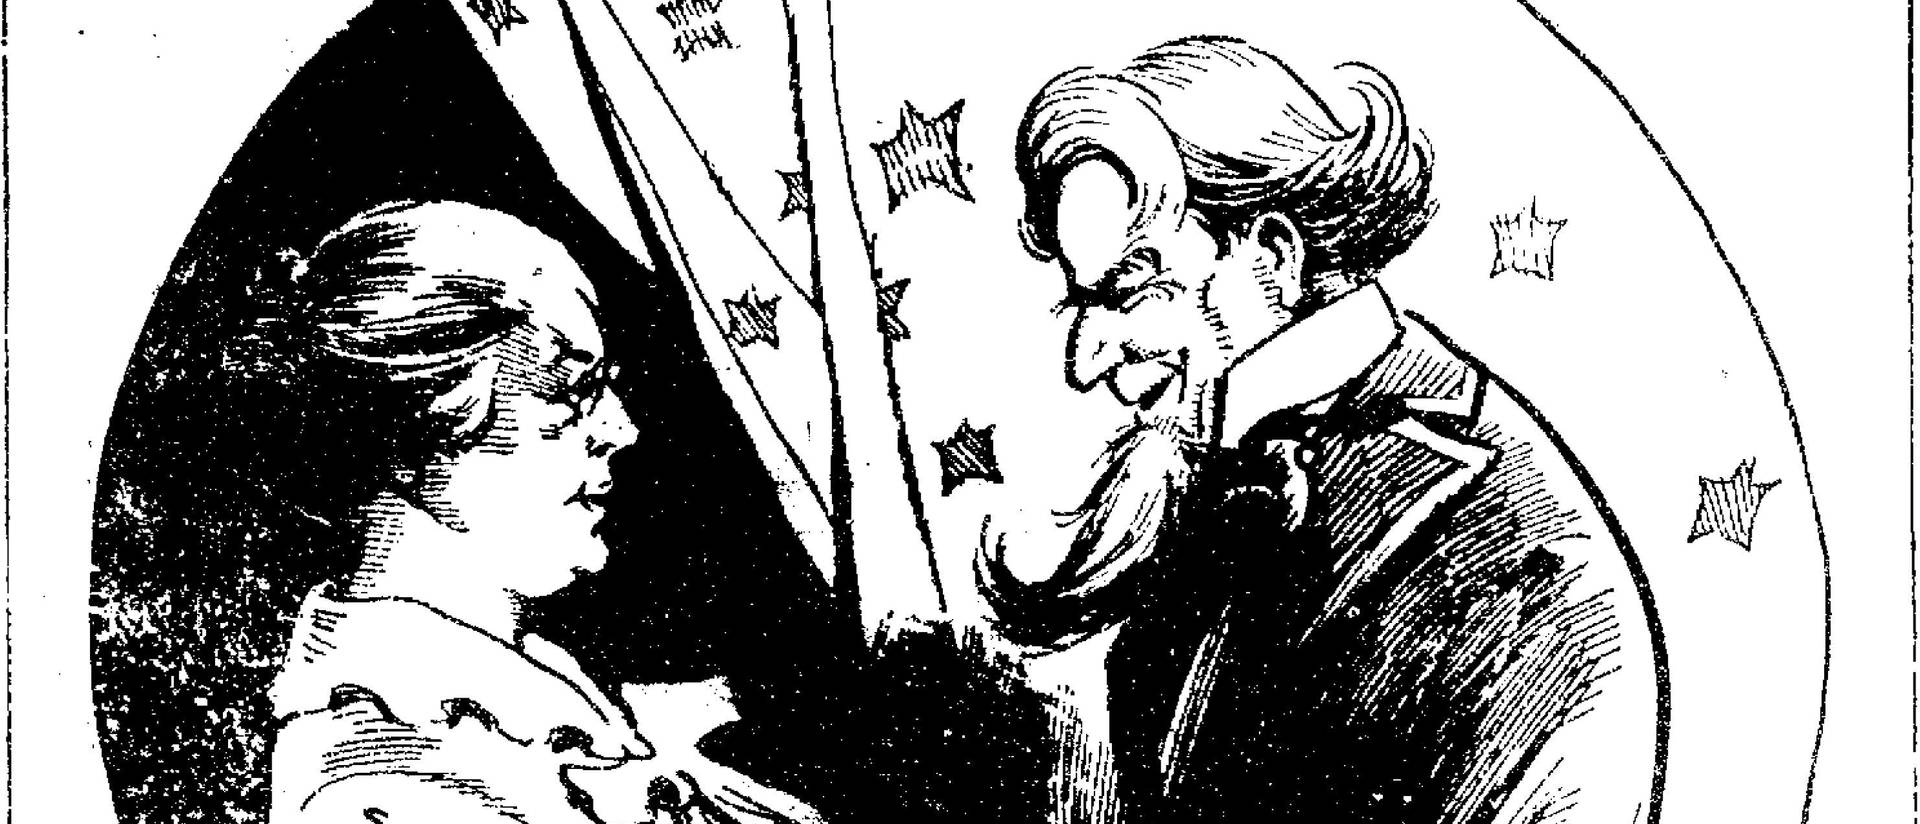 A political cartoon with Uncle Sam and a woman representing women's suffrage, holding hands.